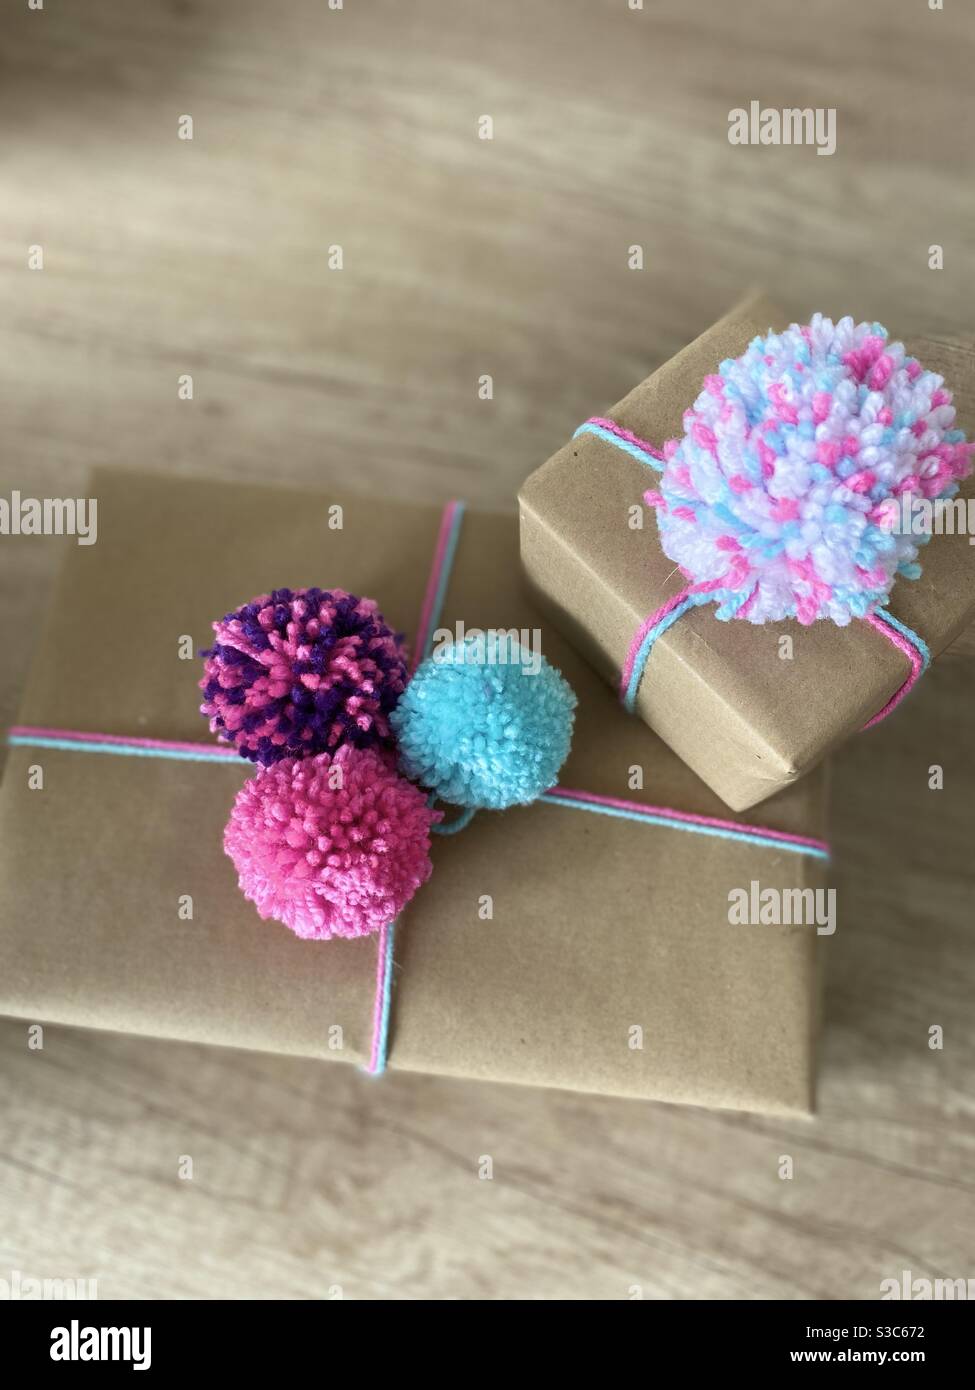 Brown wrapping paper with Pom Poms present Stock Photo